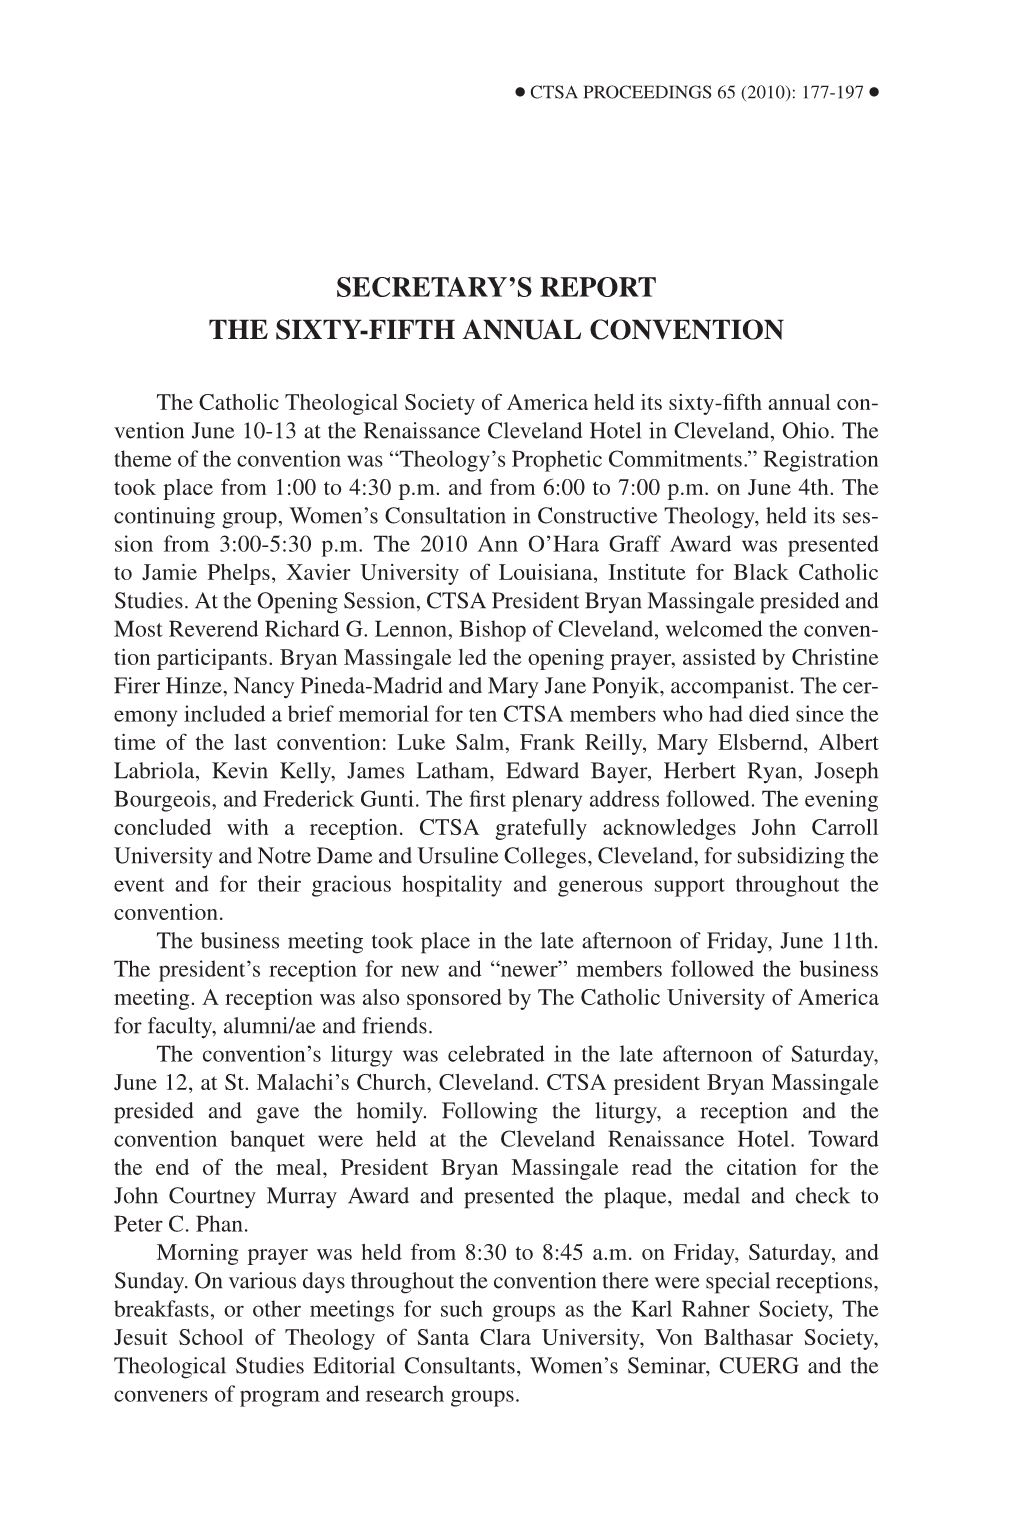 Secretary's Report the Sixty-Fifth Annual Convention